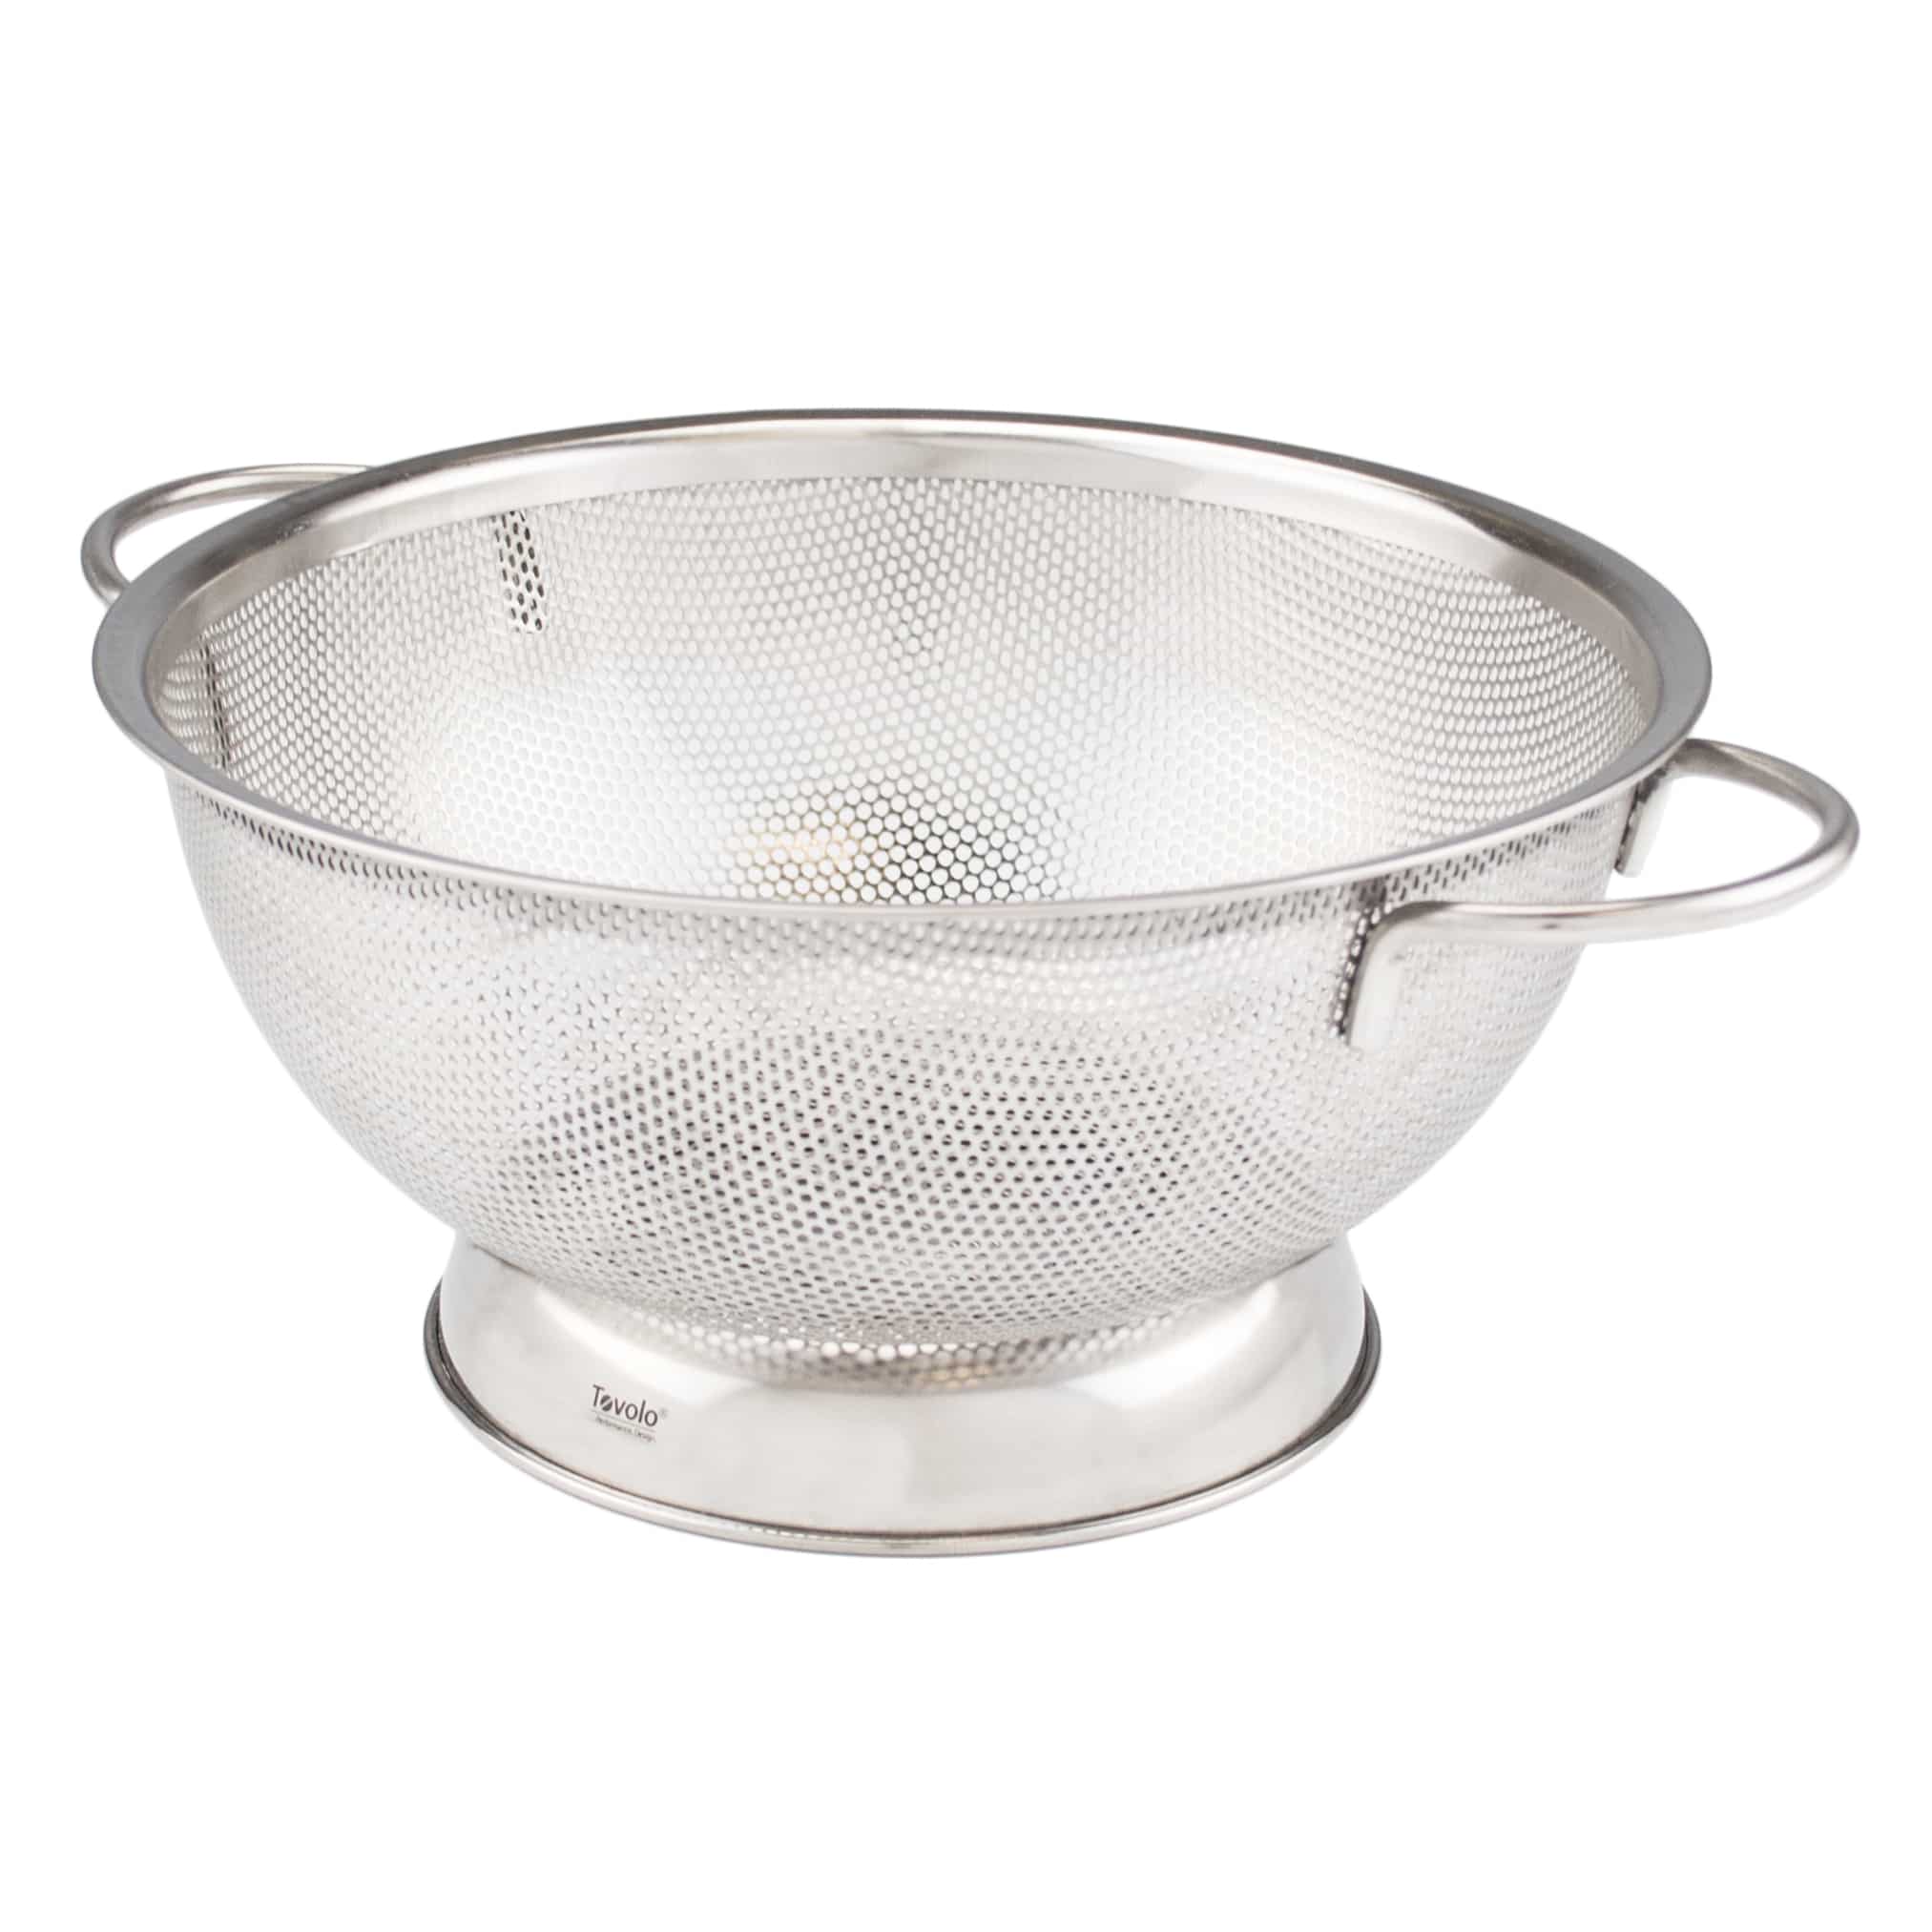 Tovolo Colander Small Perforated Stainless Steel